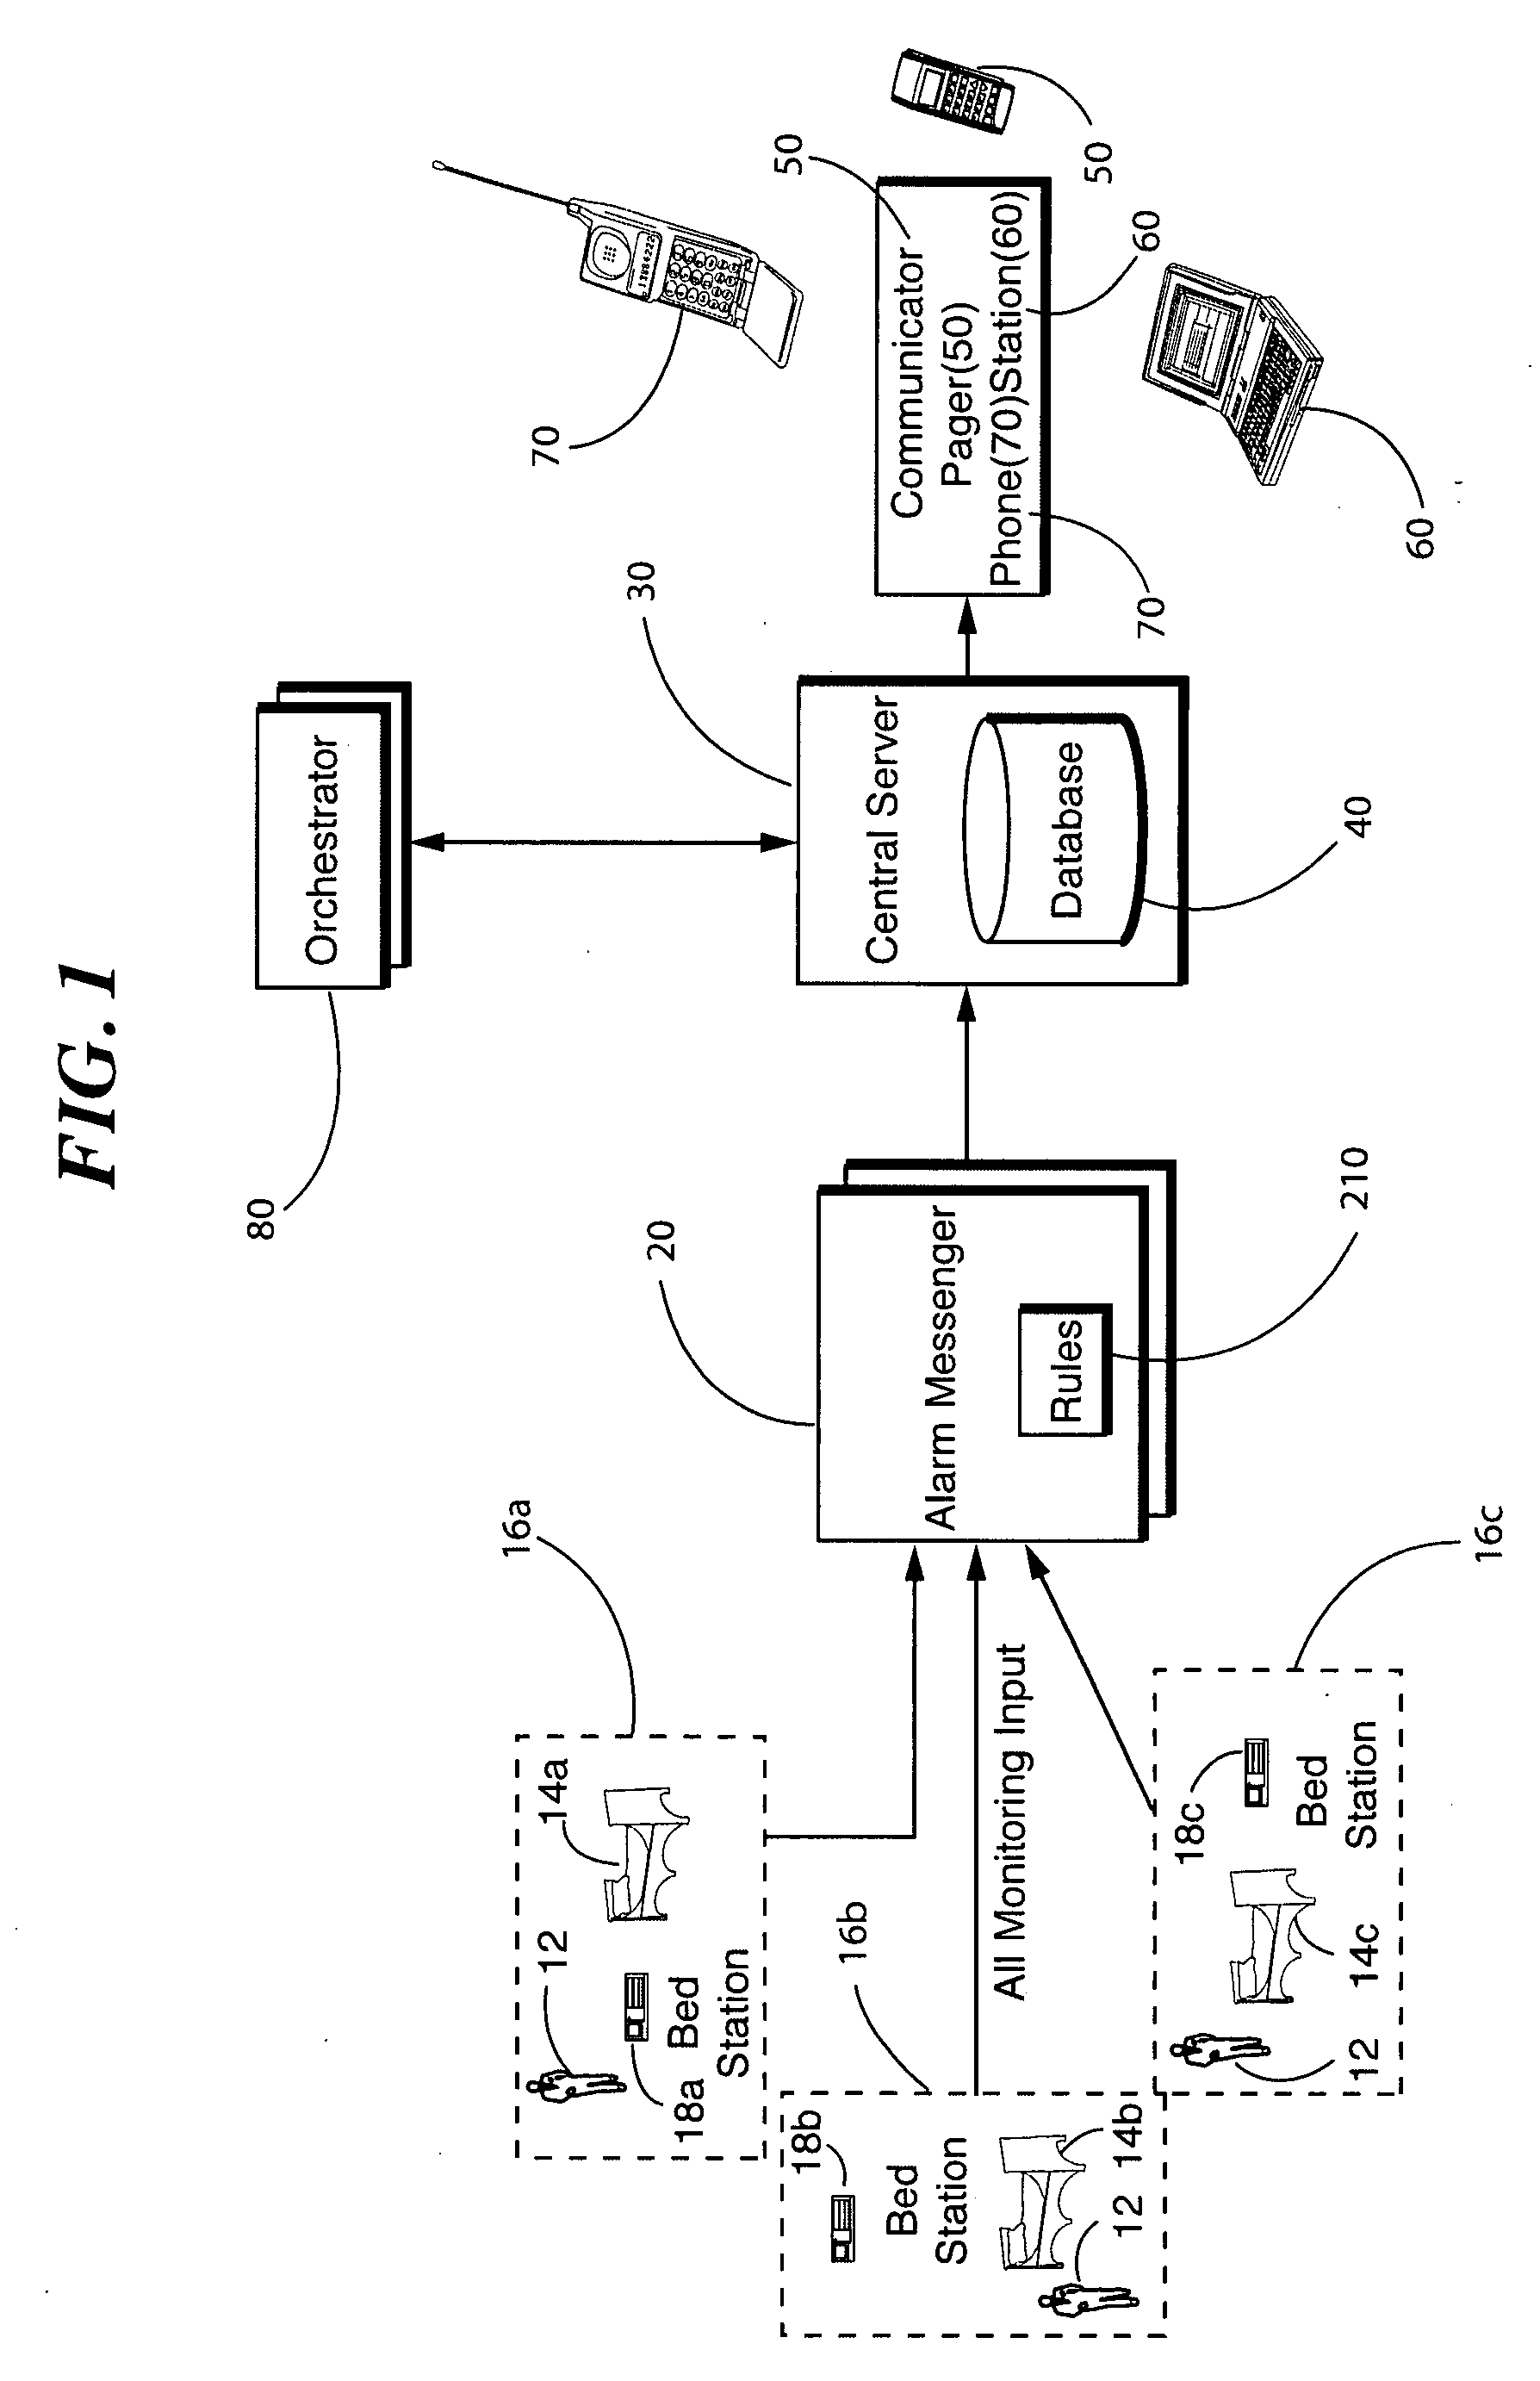 Method and system for medical alarm monitoring, reporting and normalization